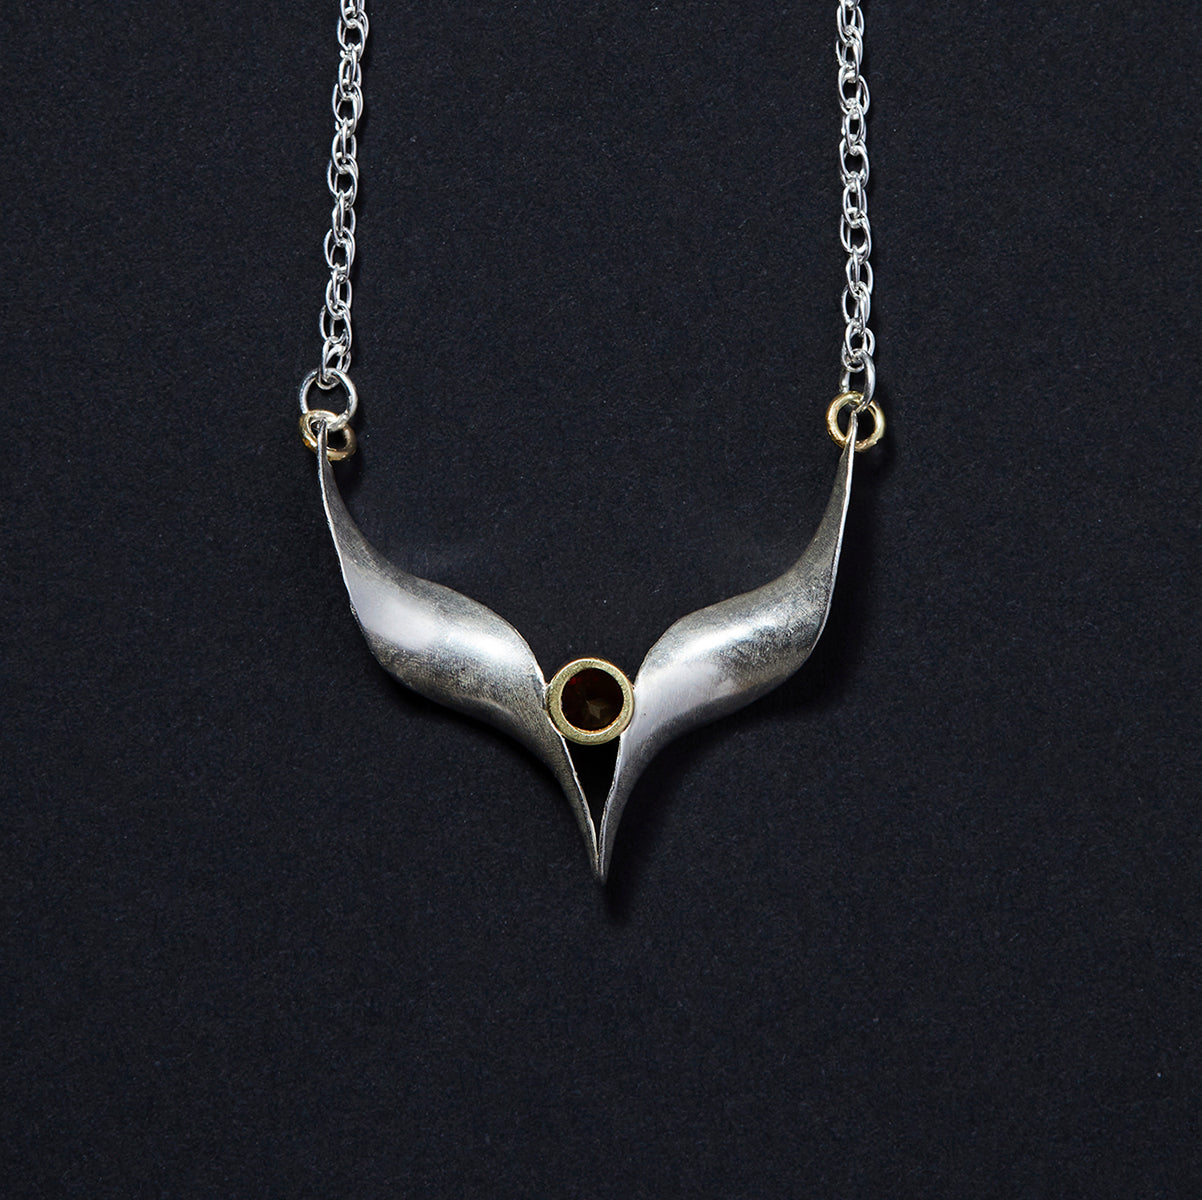 A silver bird necklace made from two mirror-image twisted and curled units. They are soldered at the lower point and attached to a silver rope chain by an 18 carat gold jump ring at each outer point. A sparkling red garnet is set in a length of 18 carat gold tube which sits above the lower point where the two units meet. View from the back.